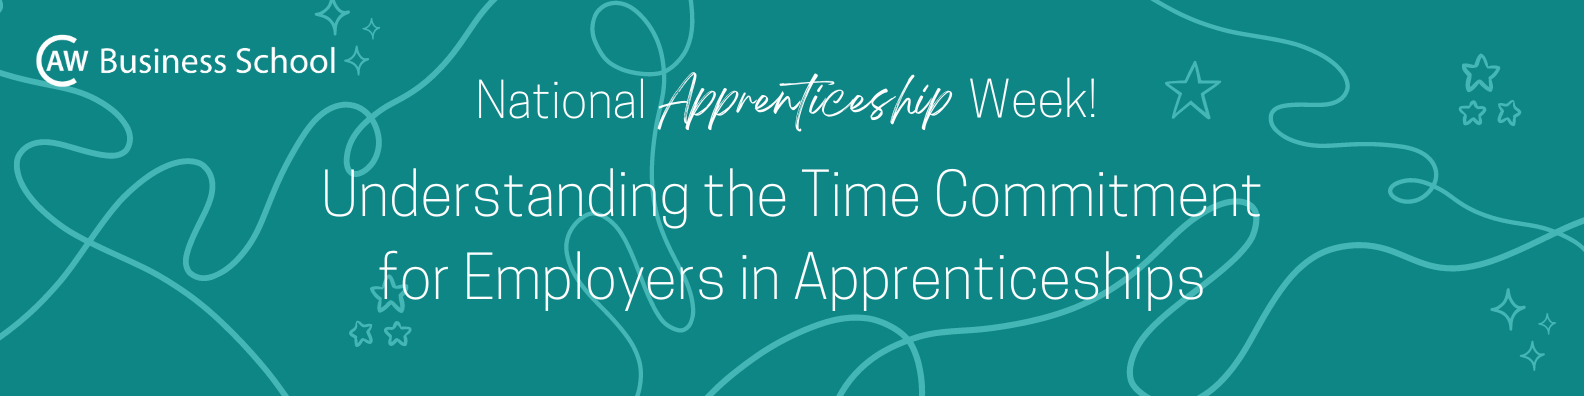 Understanding the Time Commitment for Employers in Apprenticeships